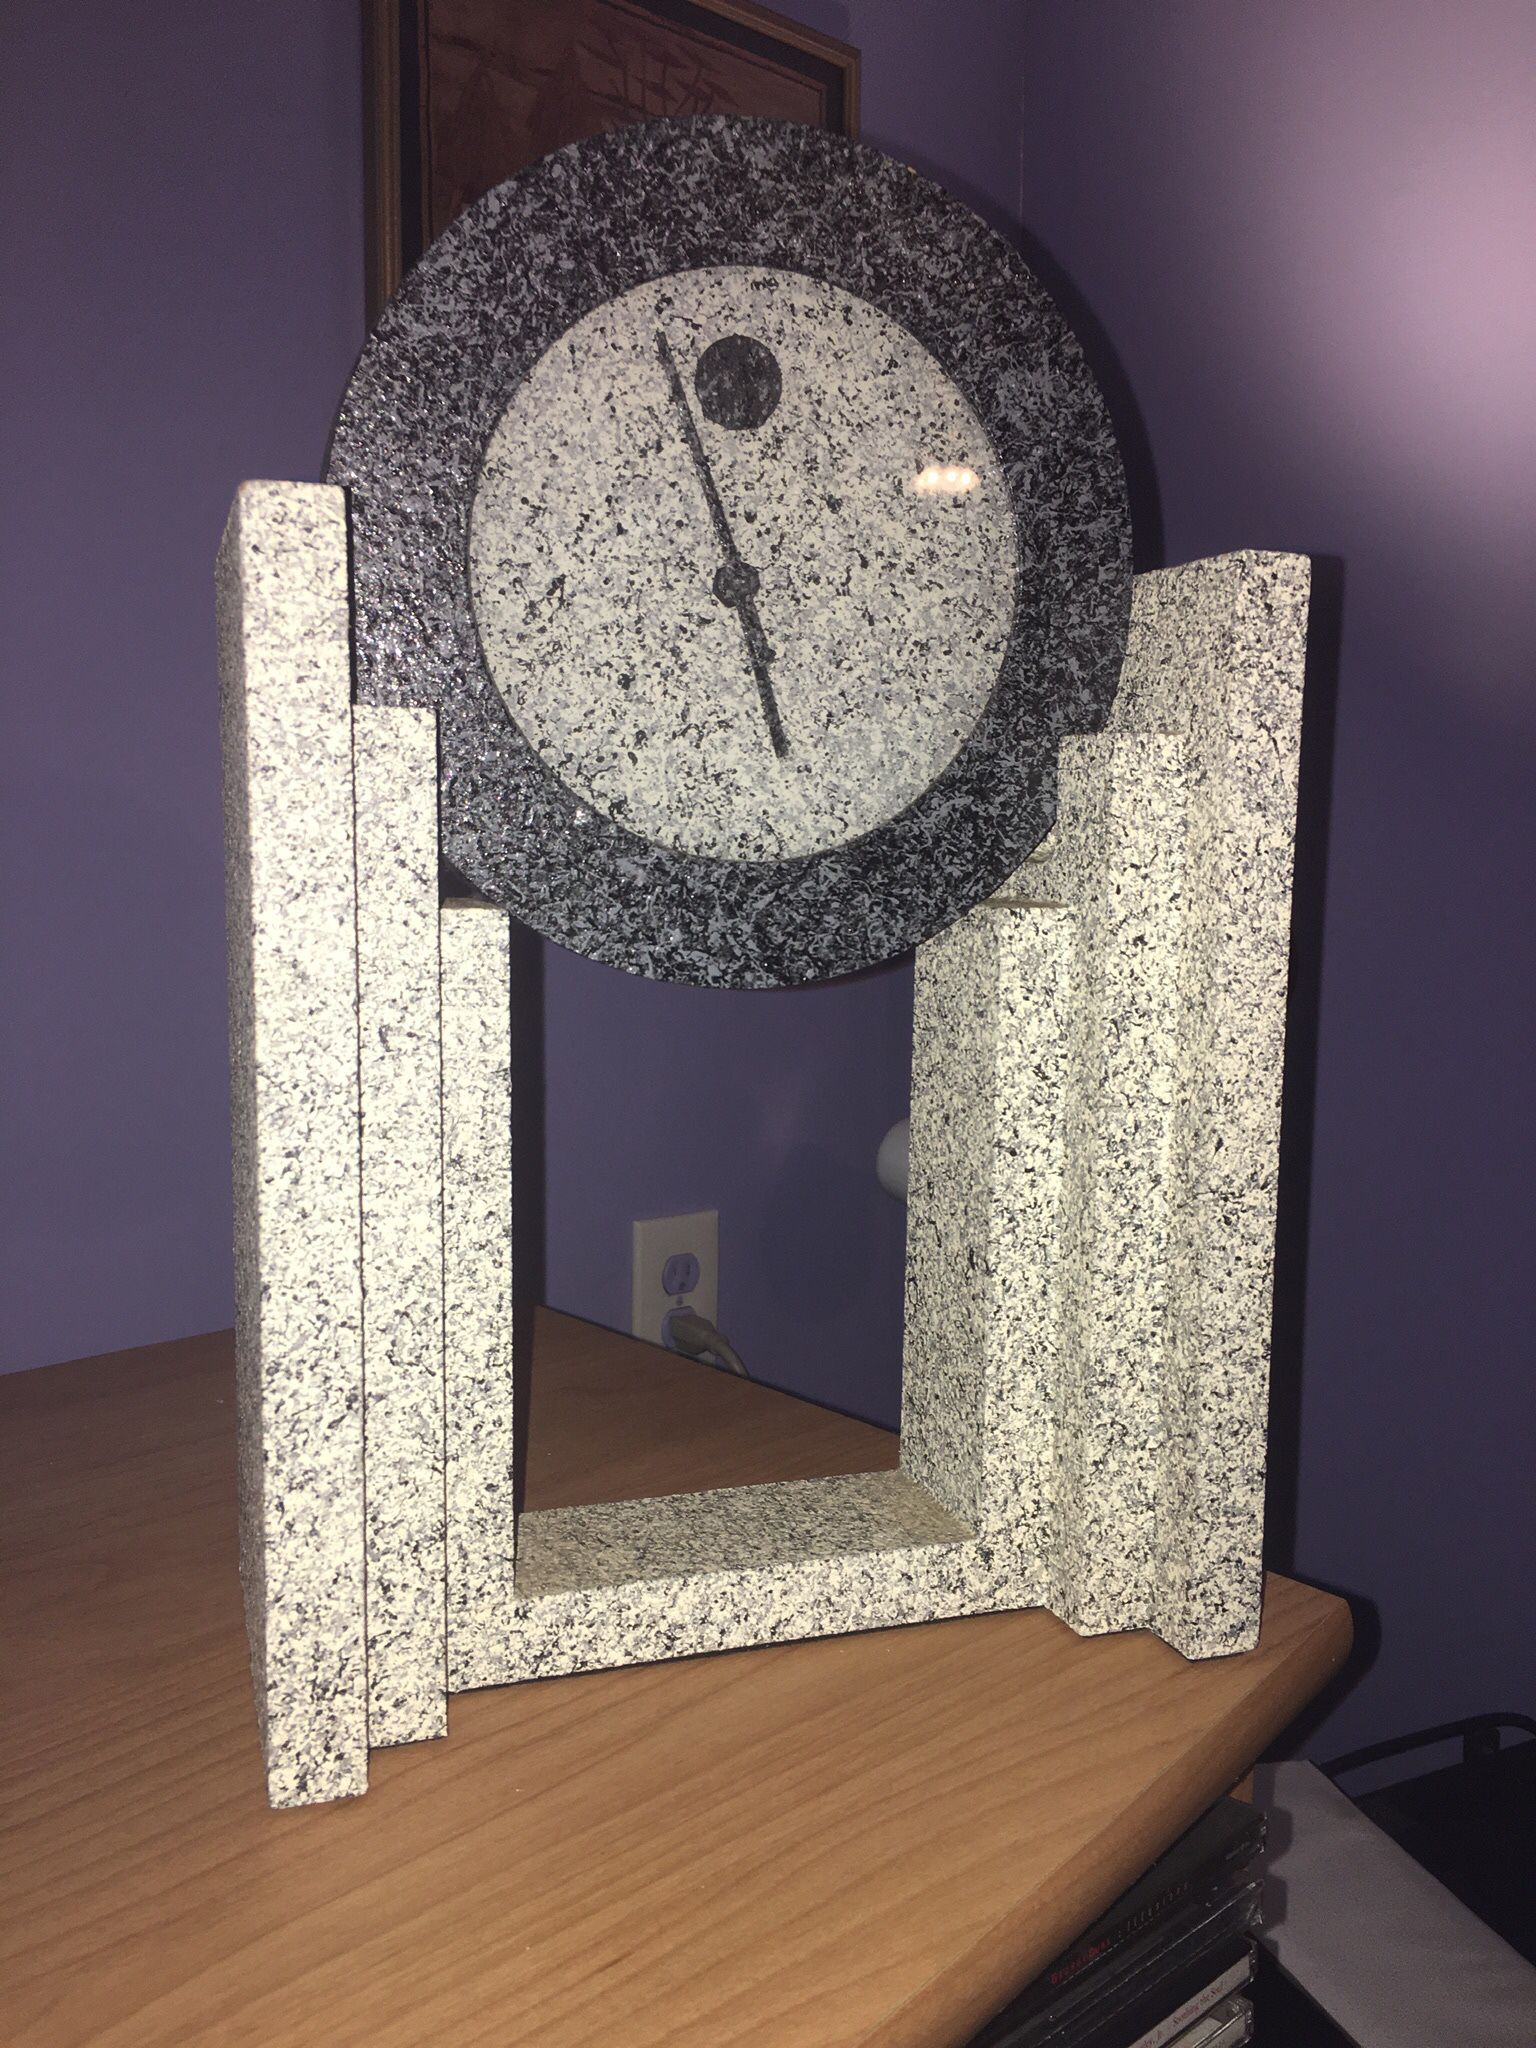 Empire Art Products 1980's Vintage Collectible Grey Faux Granite Mantle Clock